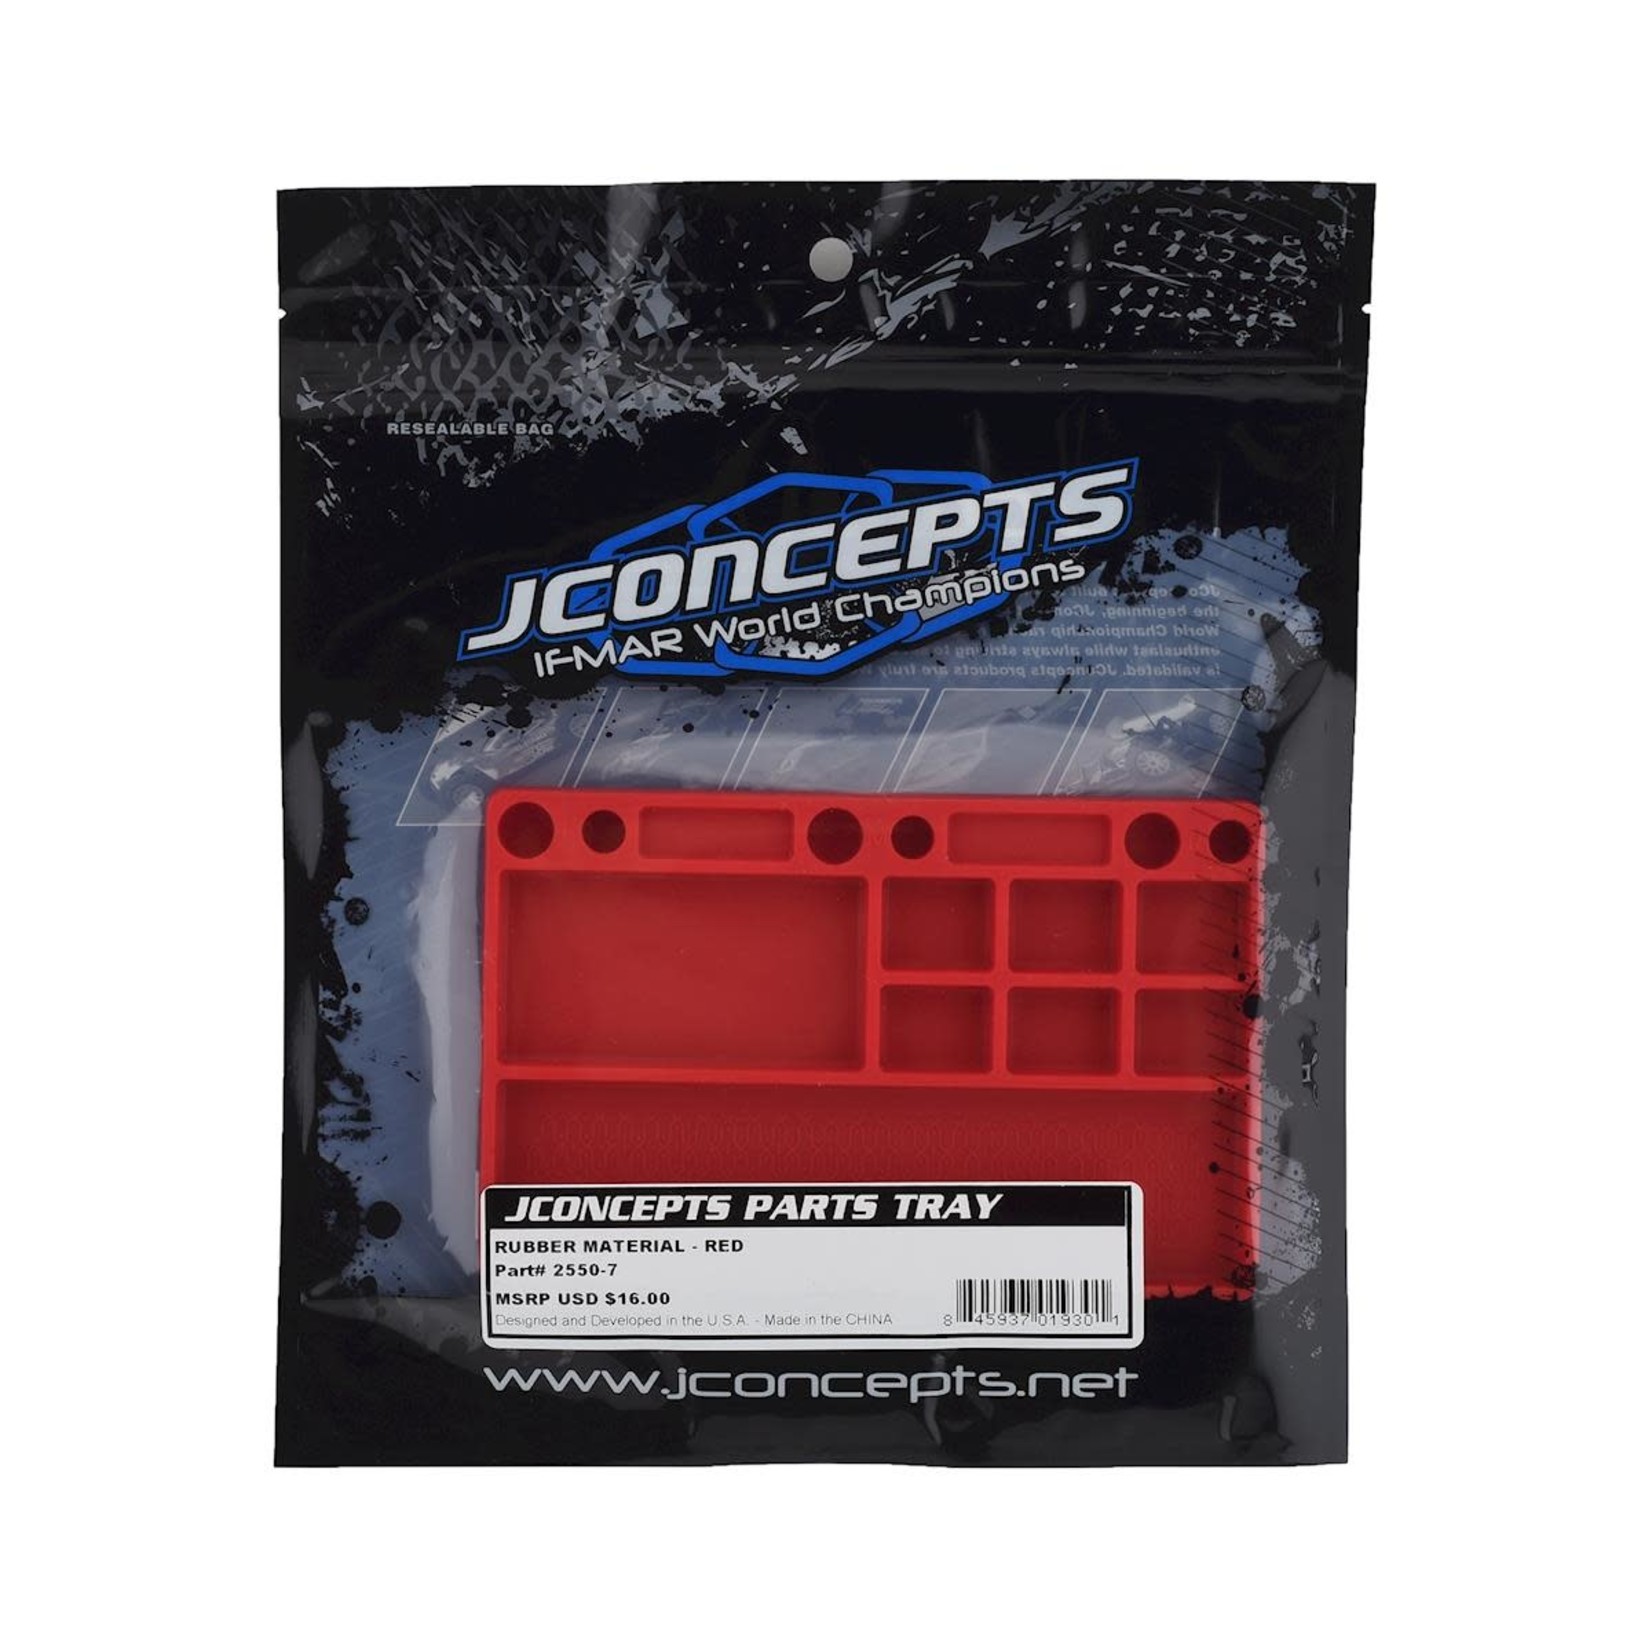 JConcepts JConcepts Rubber Parts Tray (Red) #2550-7